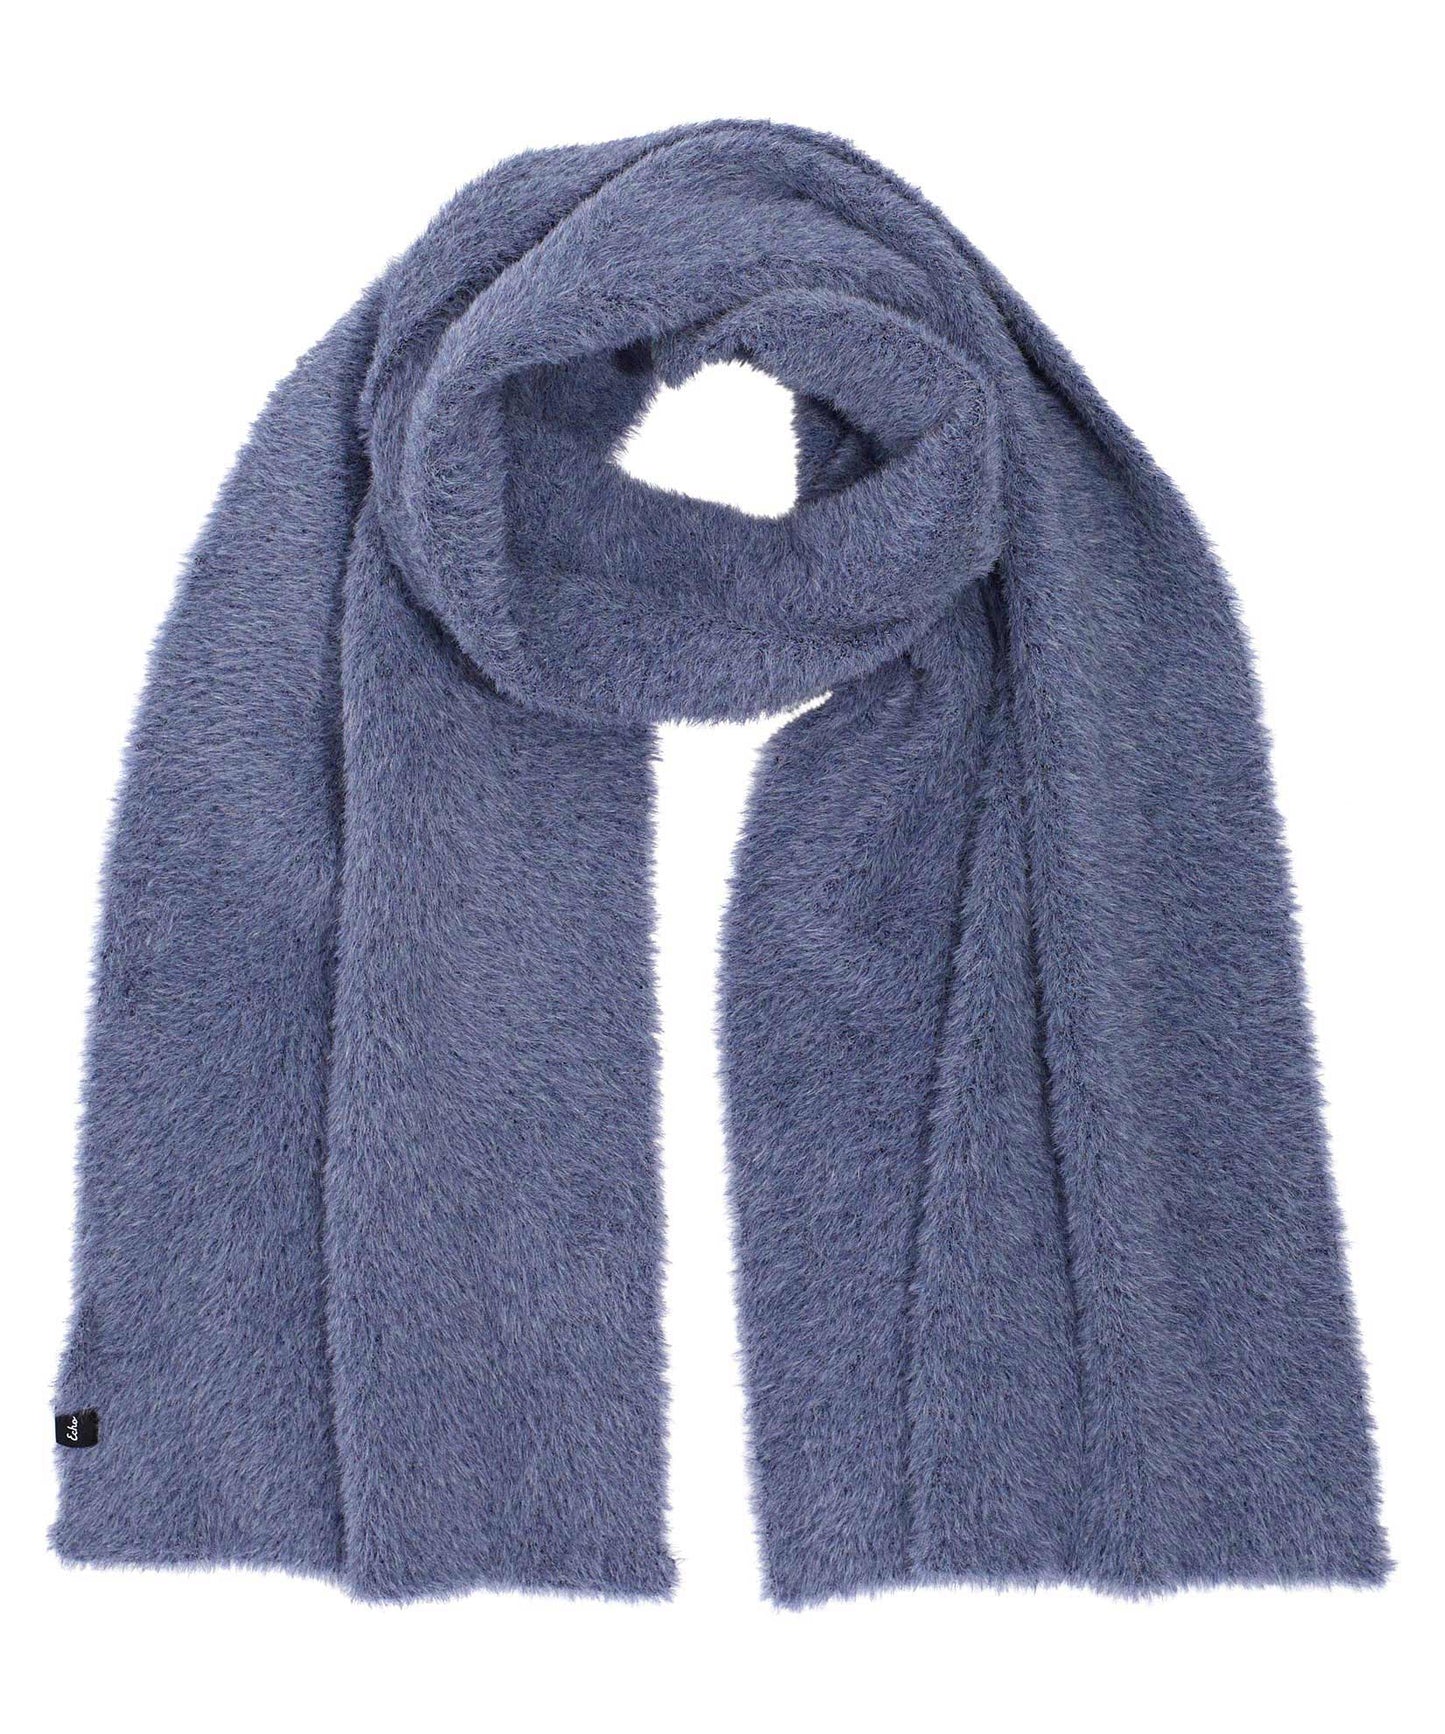 Brushed Furry Scarf in color Navy